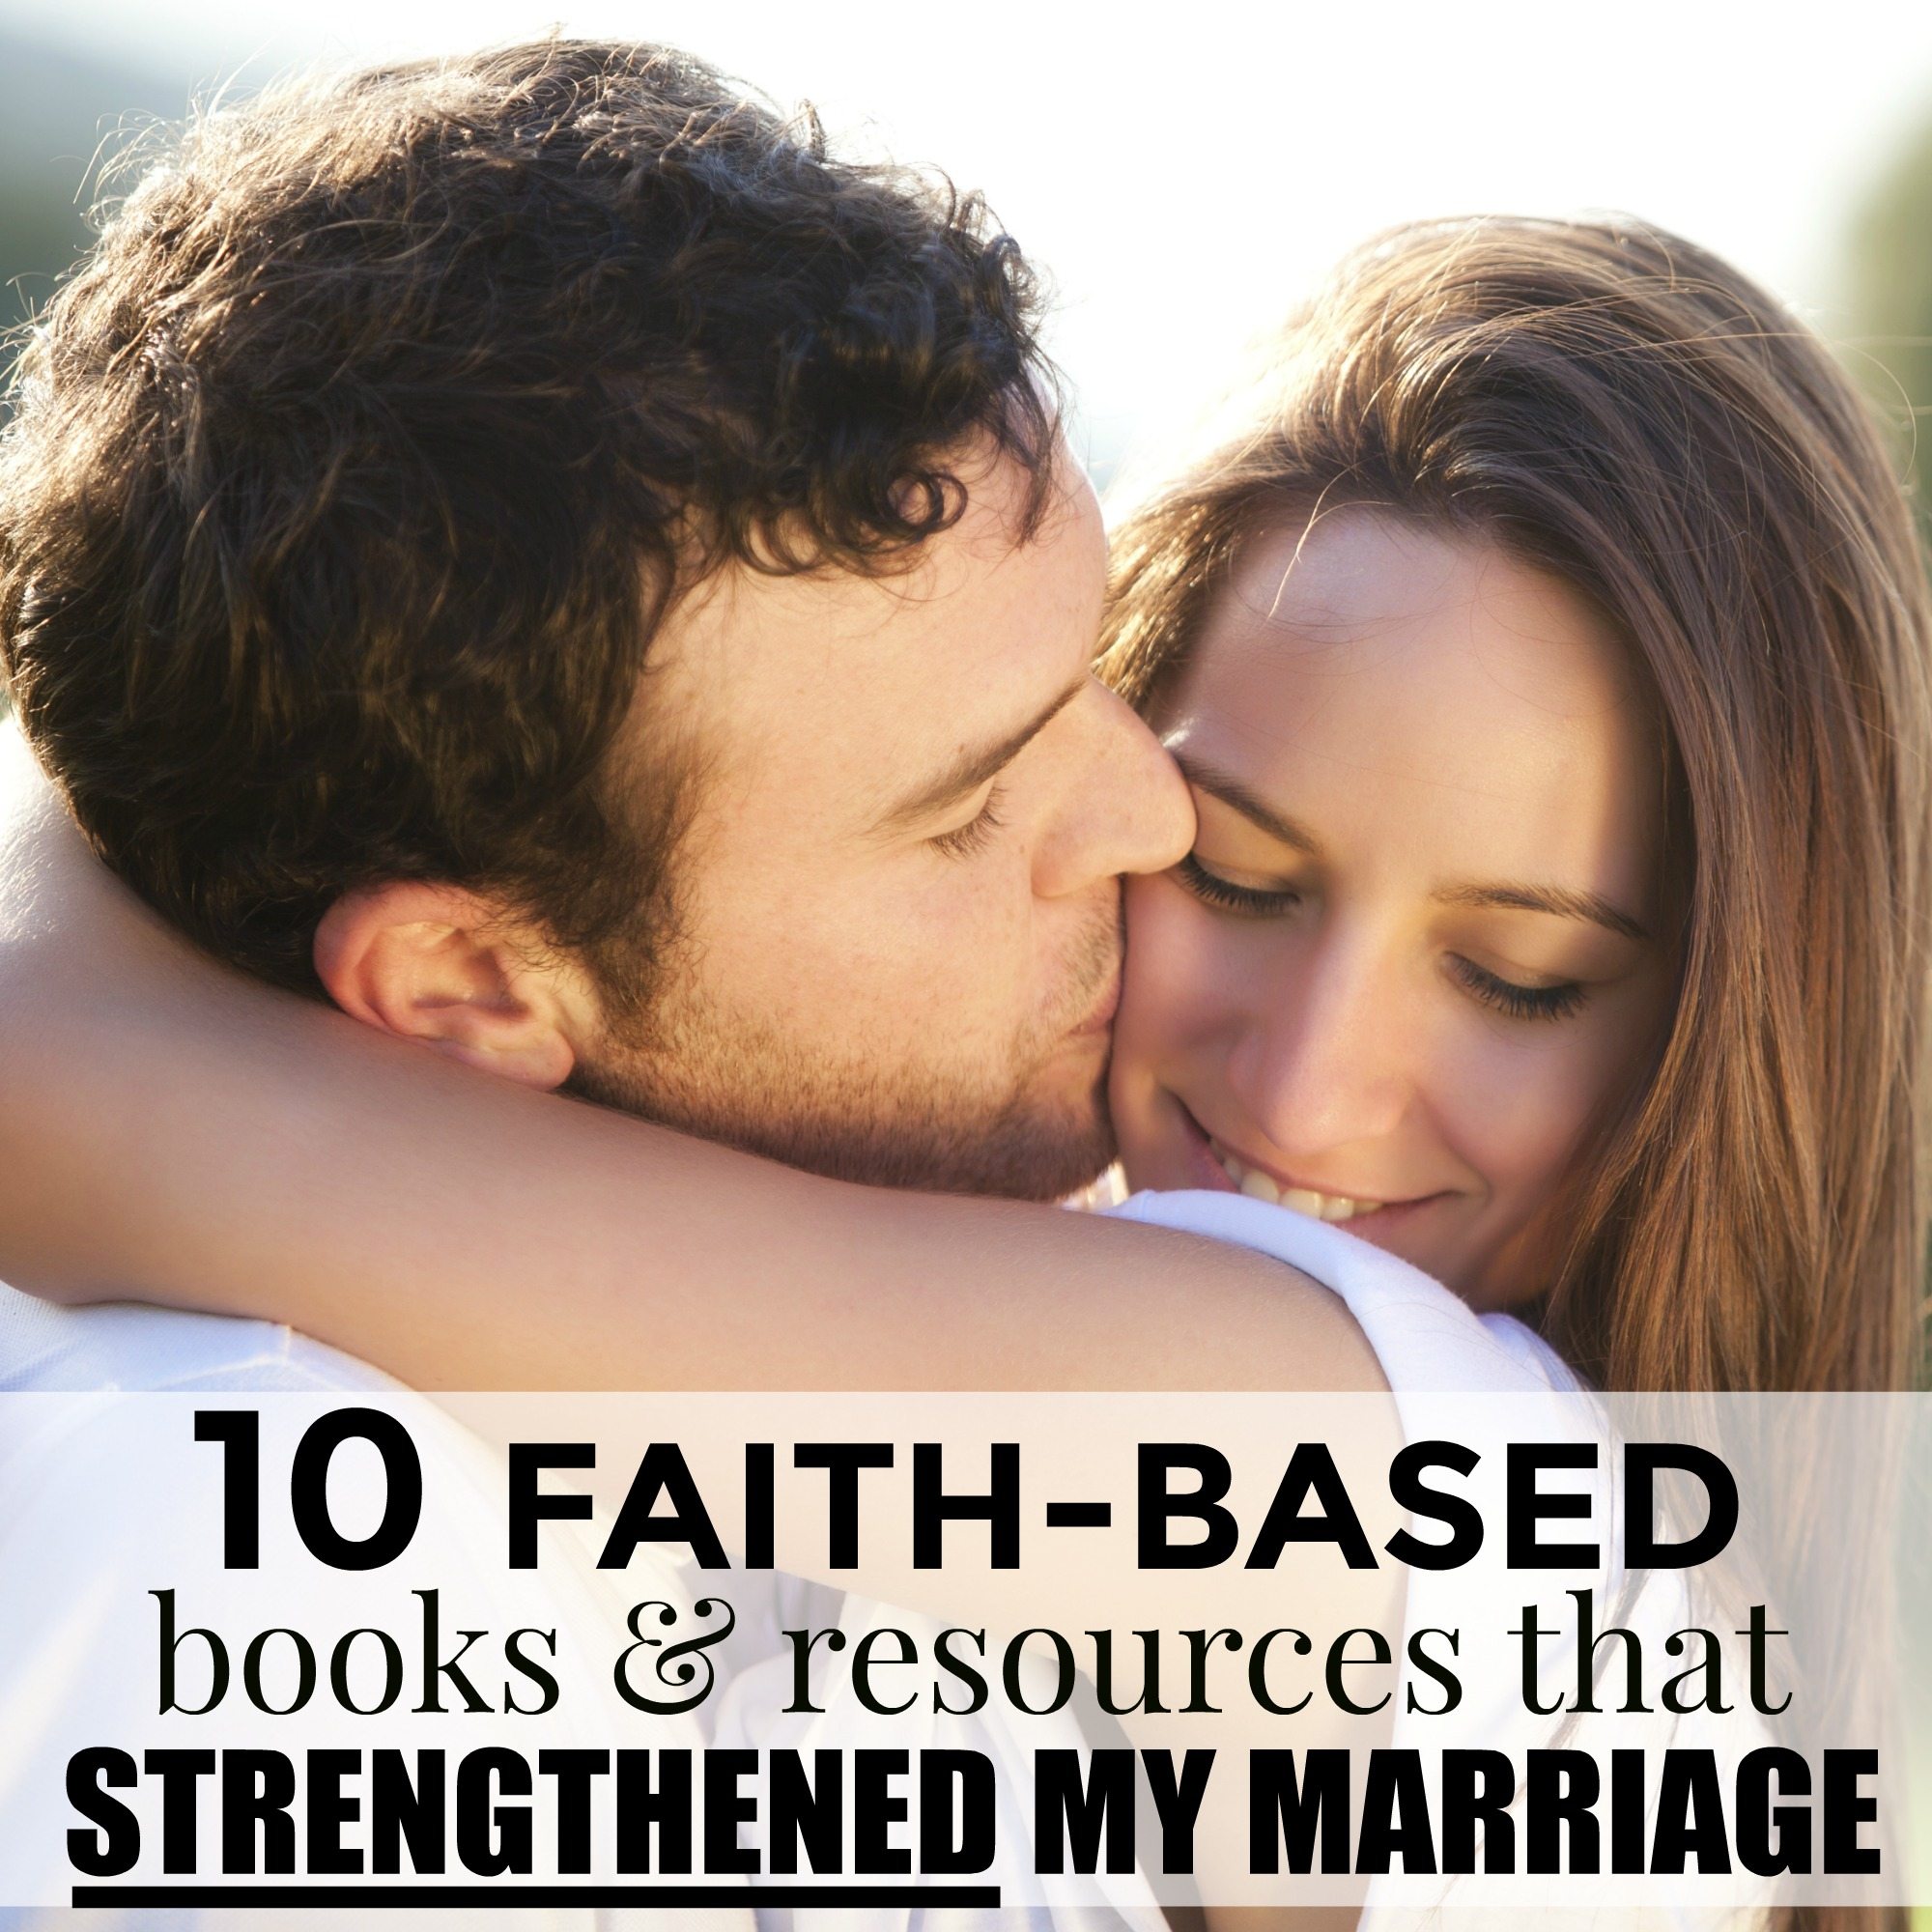 10 FAITH-BASED Books and Resources that STRENGTHENED my Marriage